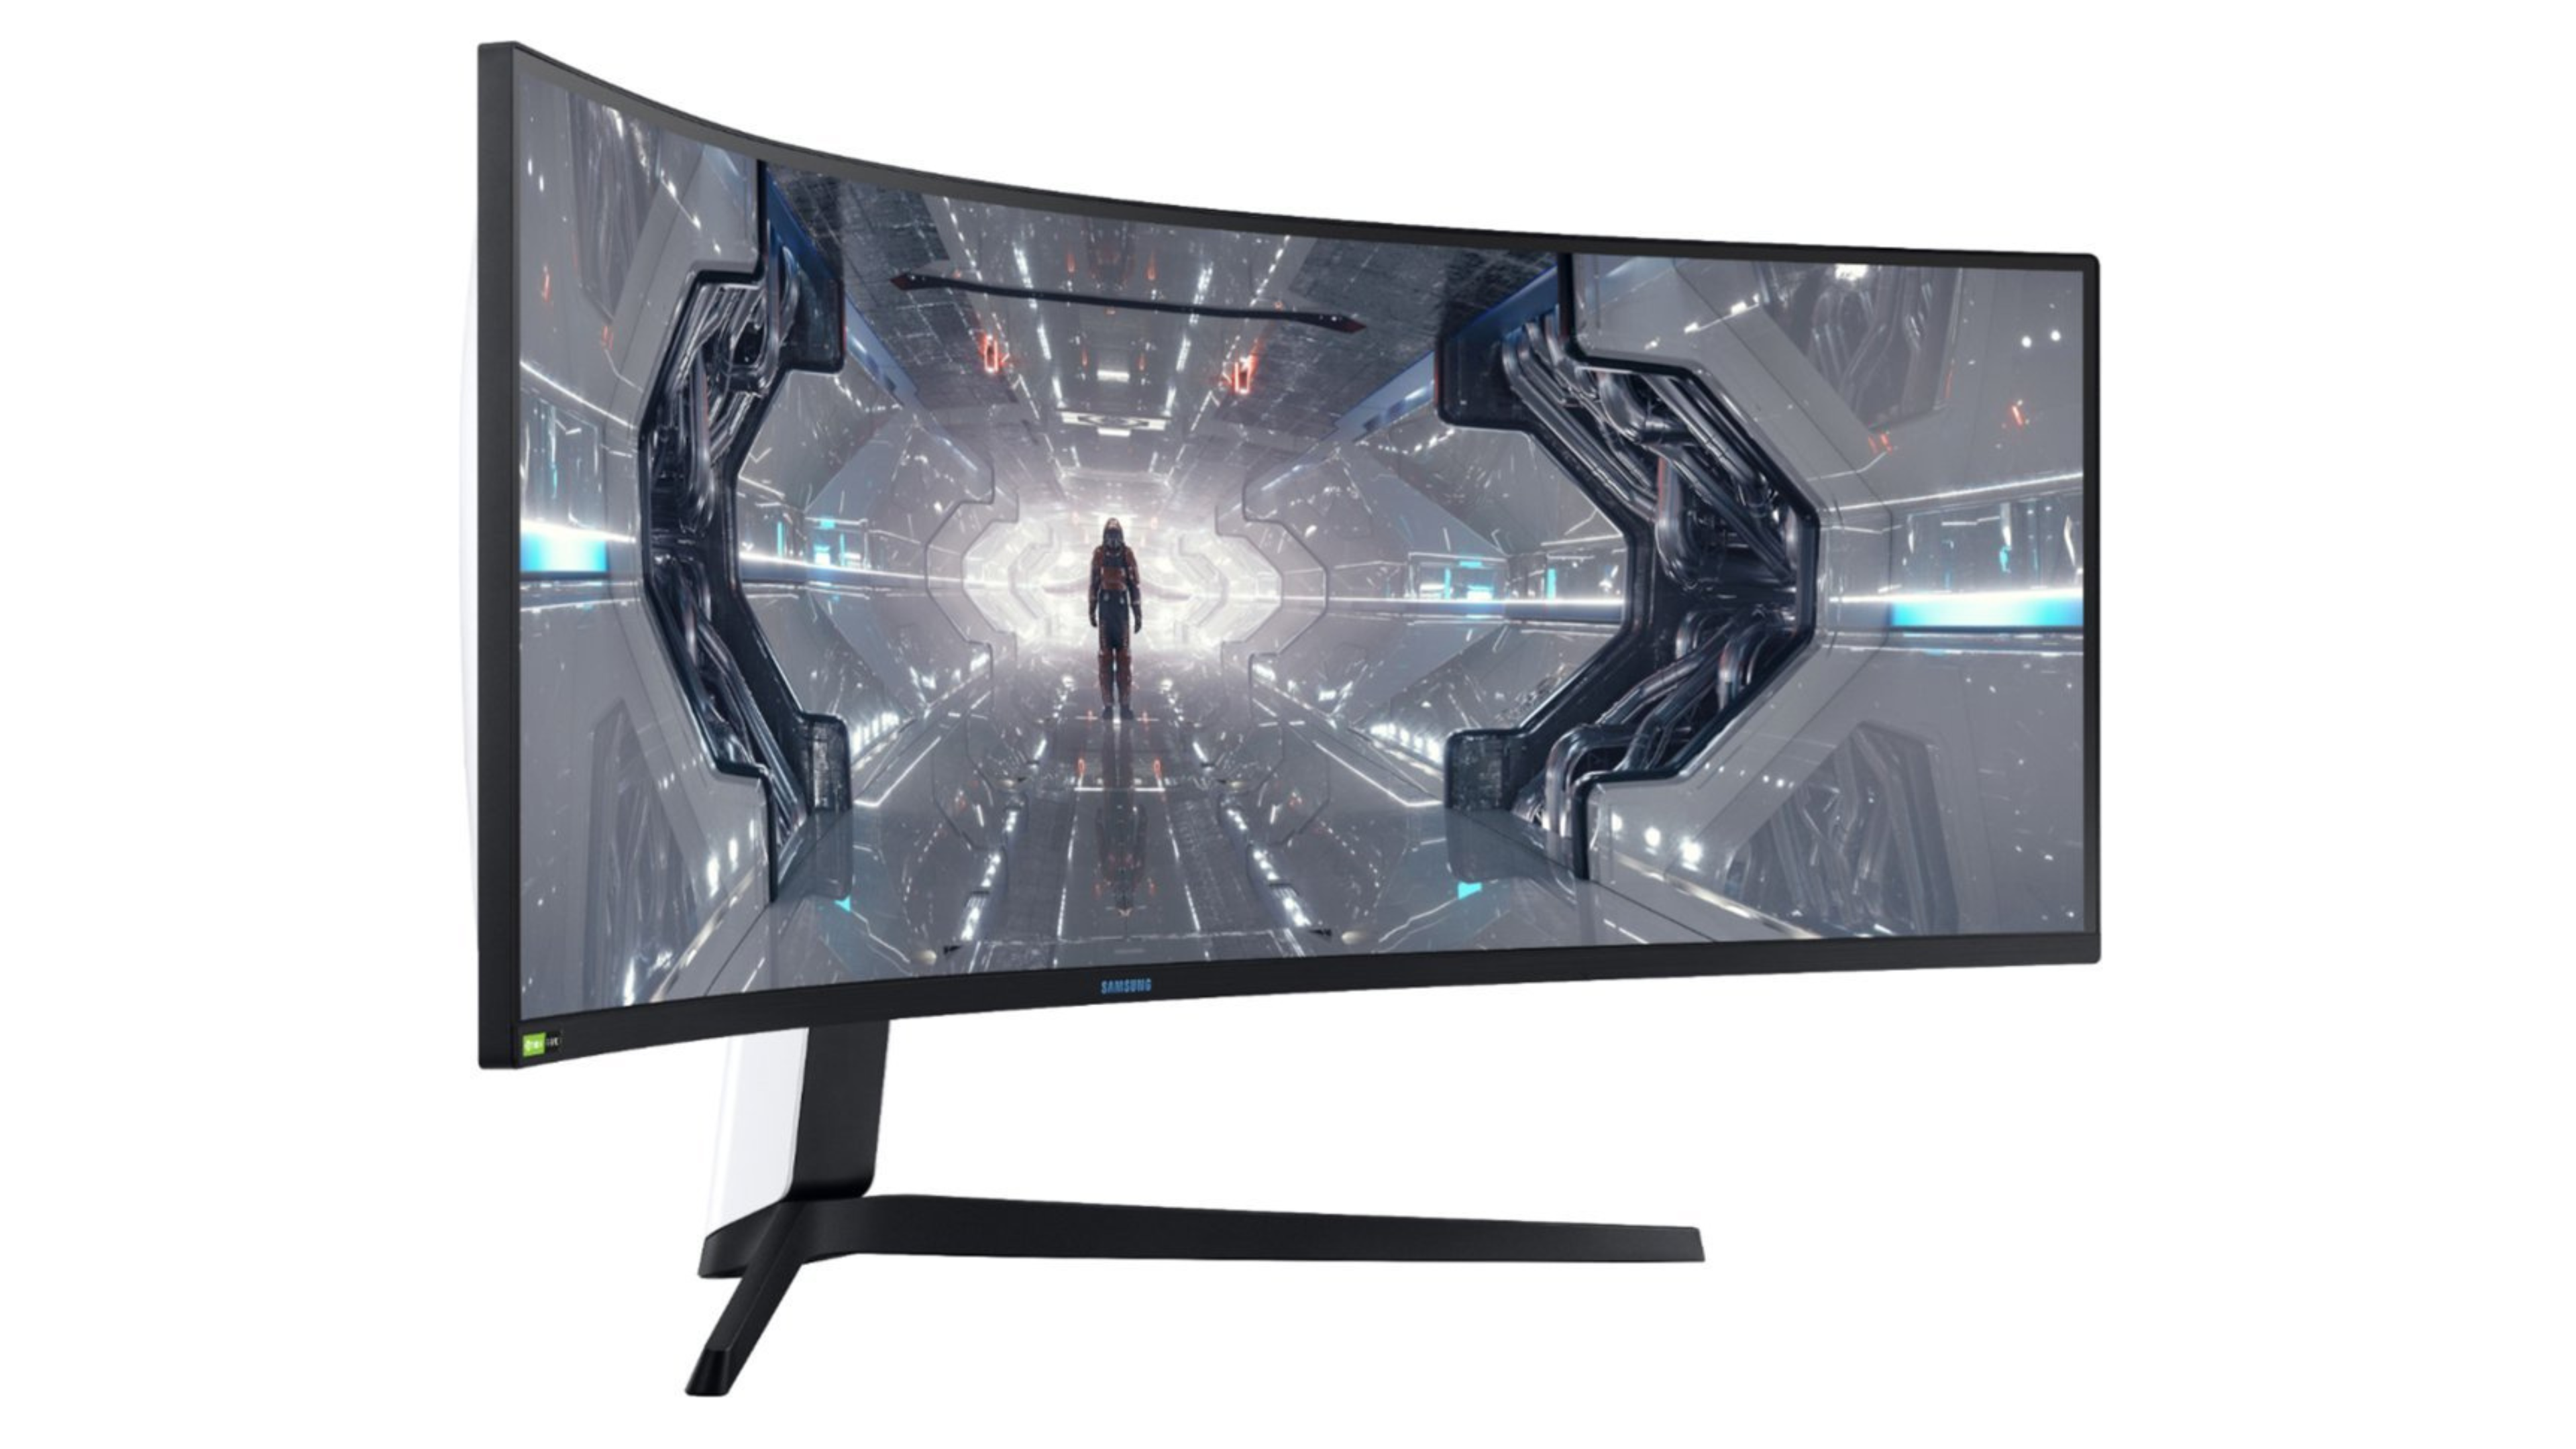 Samsung Odyssey 49 inch 1000R Curved gaming monitor with space theme on screen